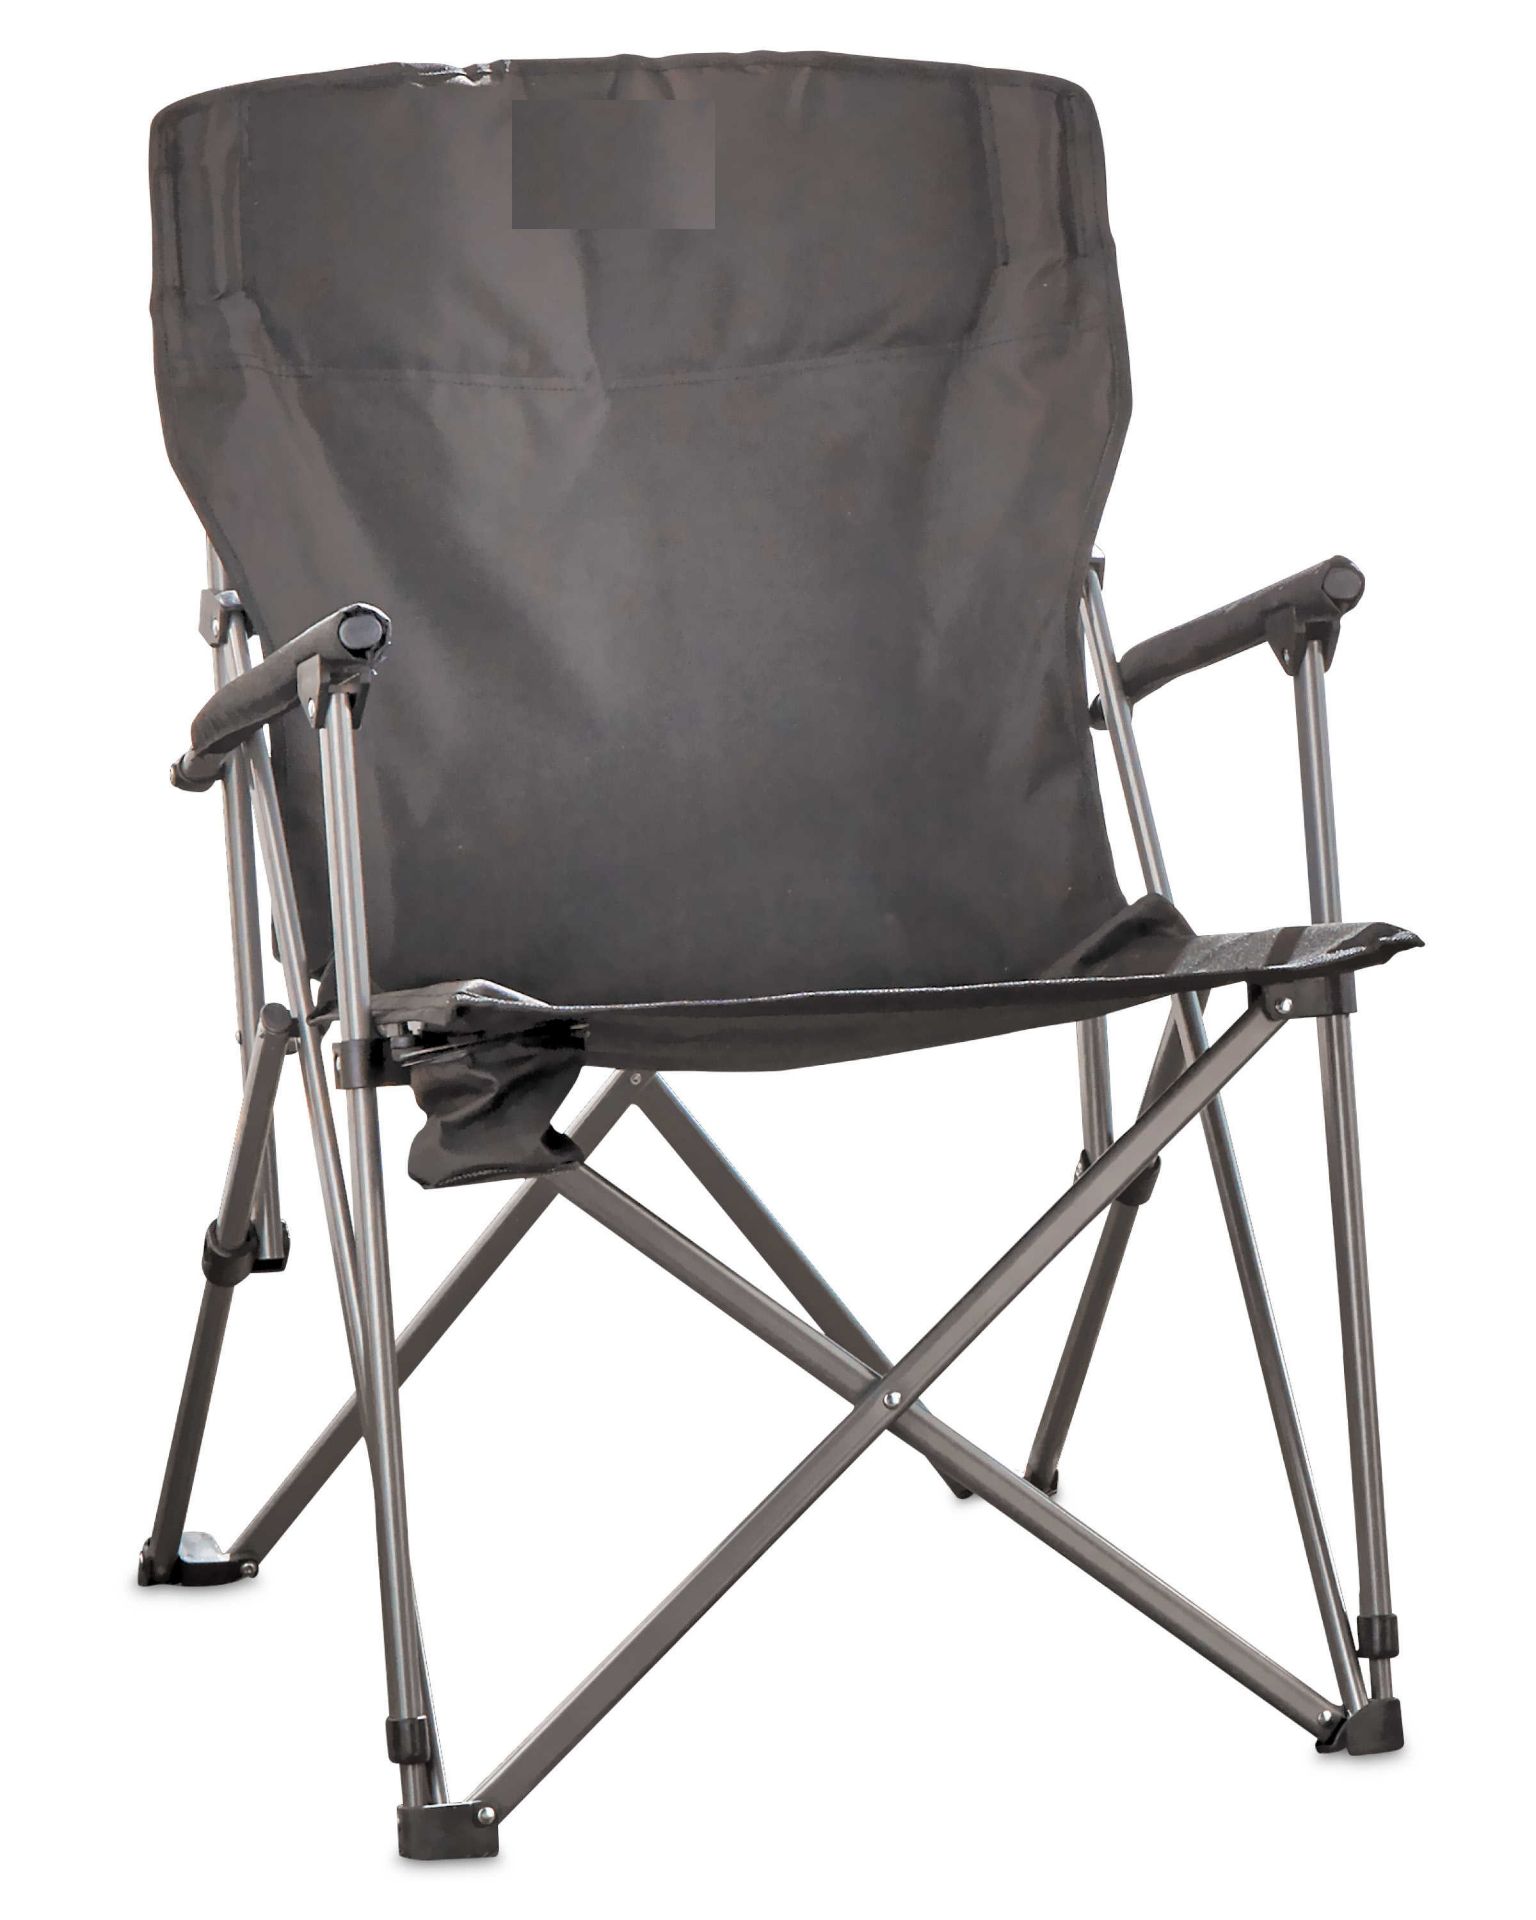 V Brand New Tourer Chair In Silver/Black With Carry Case - Lightweight Steel Frame So Ideal For